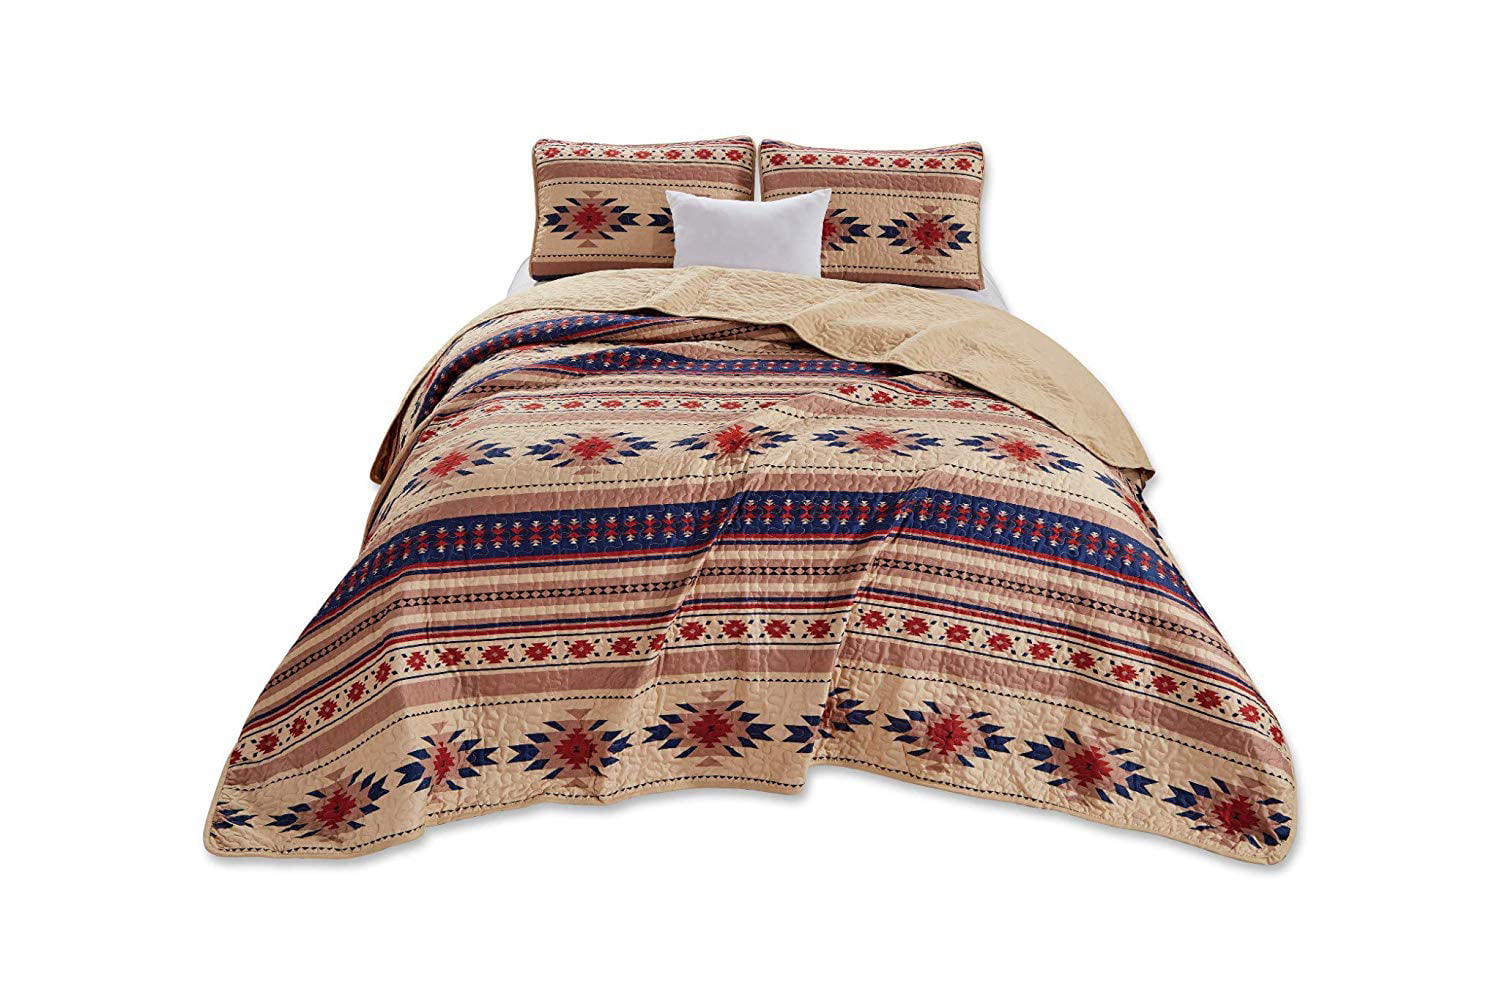 Details about   INDIAN PINK BIRD QUEEN BED COVER BLANKET Kantha Quilt Throw Ethnic Decorative 